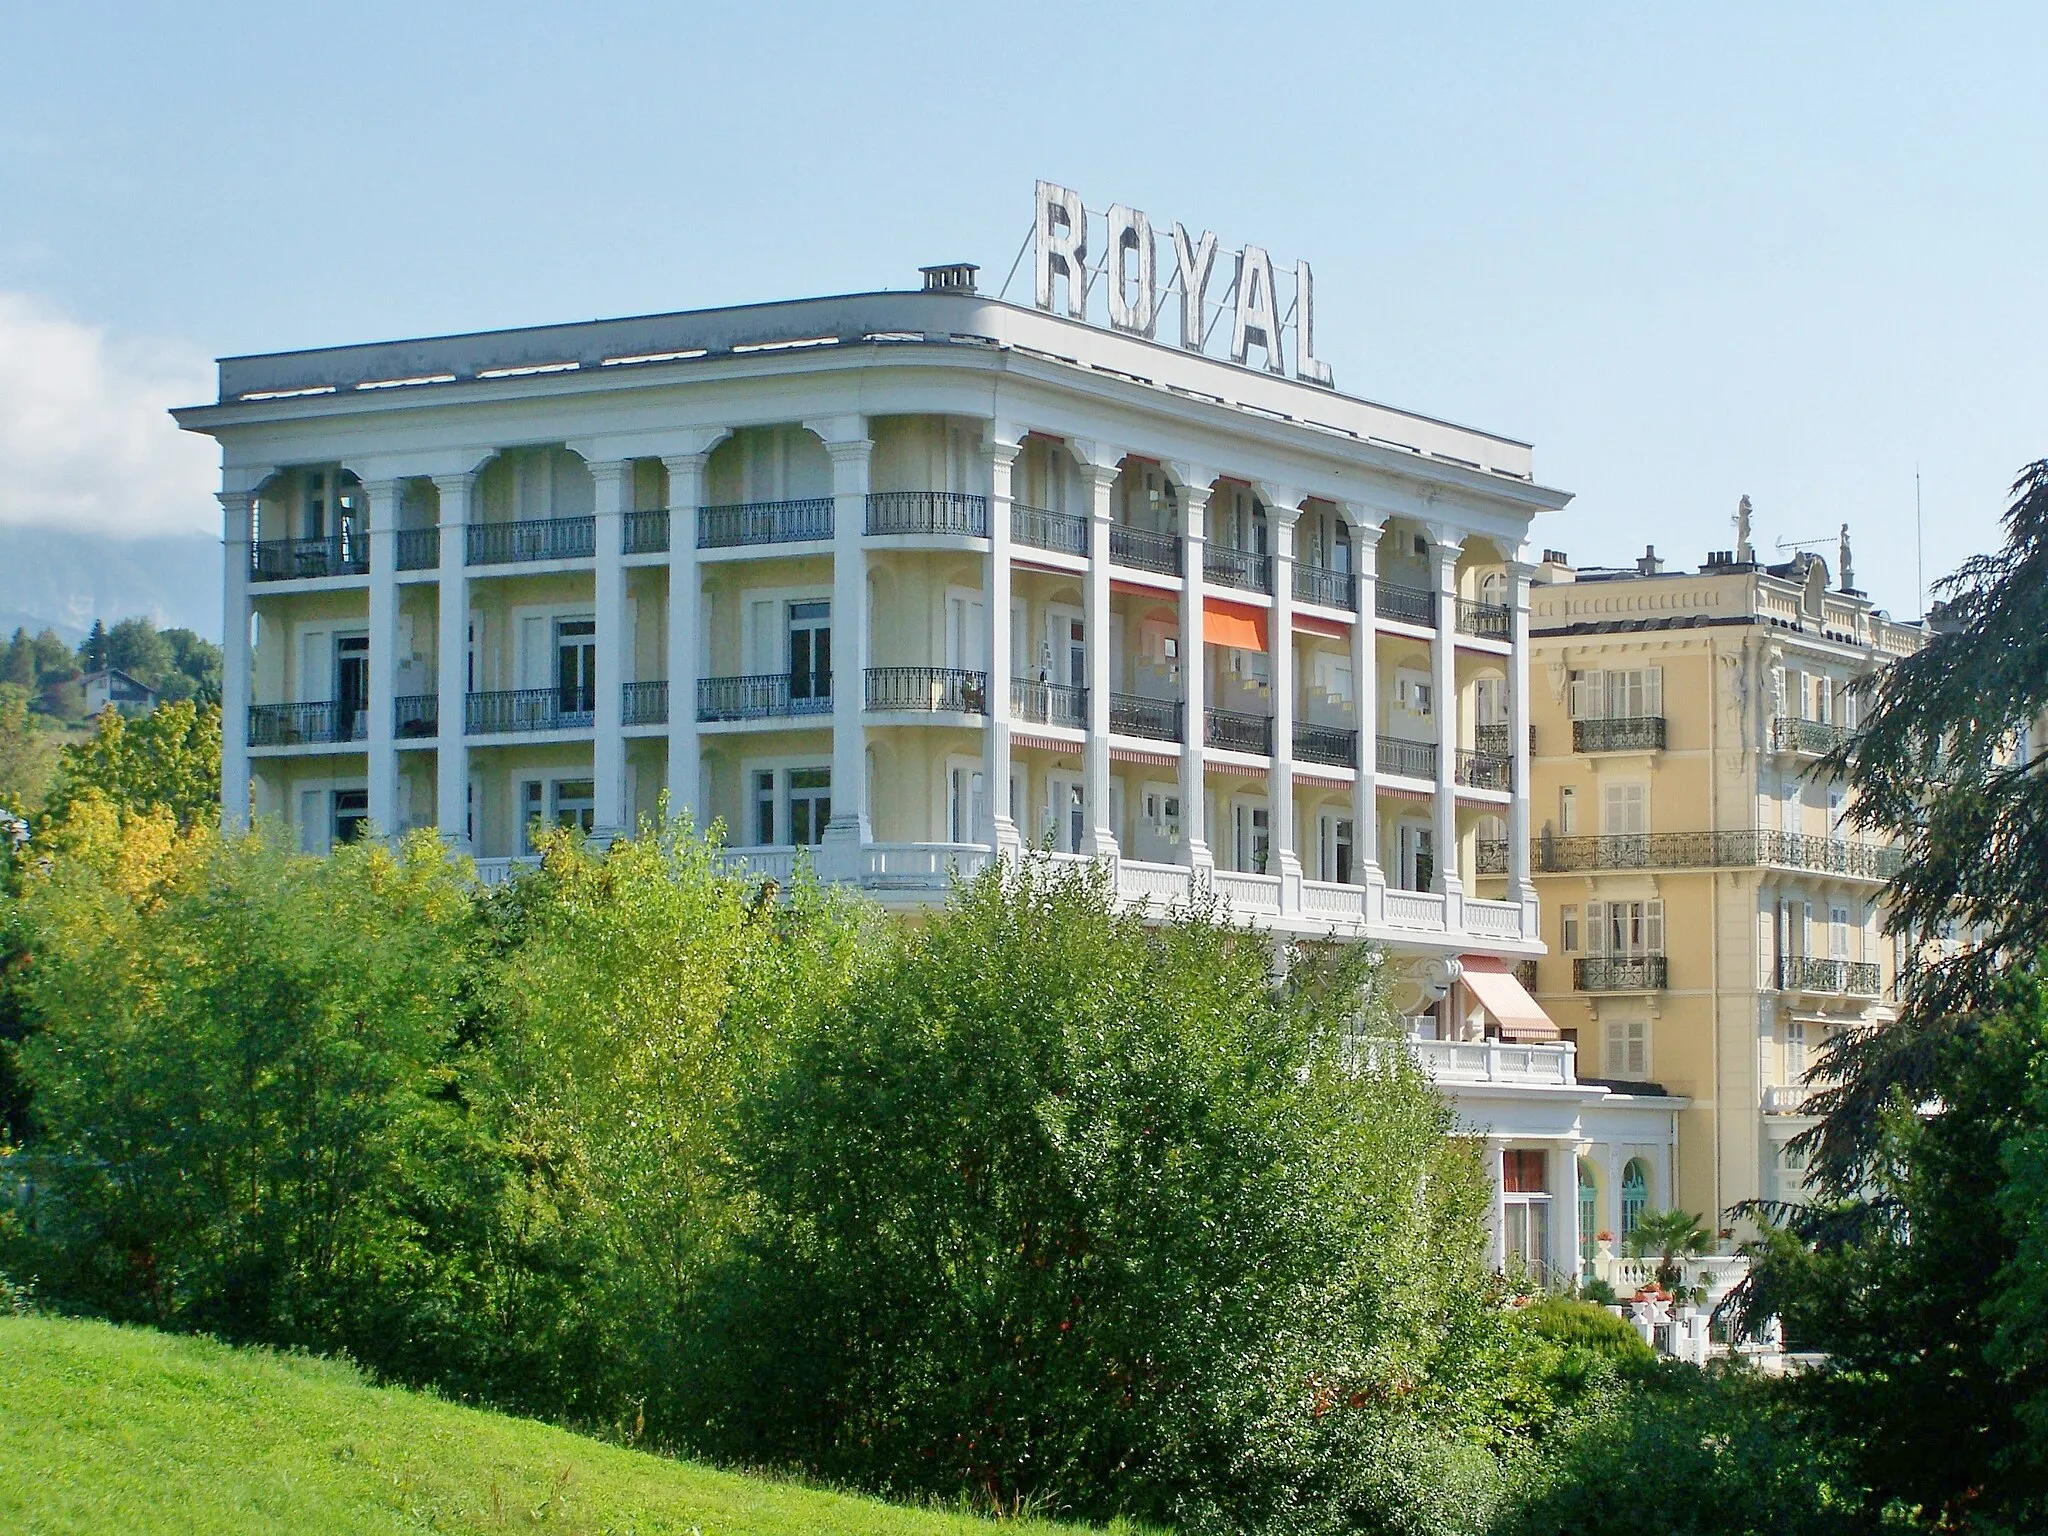 Photo showing: Sight of Hôtel Royal (or Palace Royal) in Aix-les-Bains, in Savoie, France.